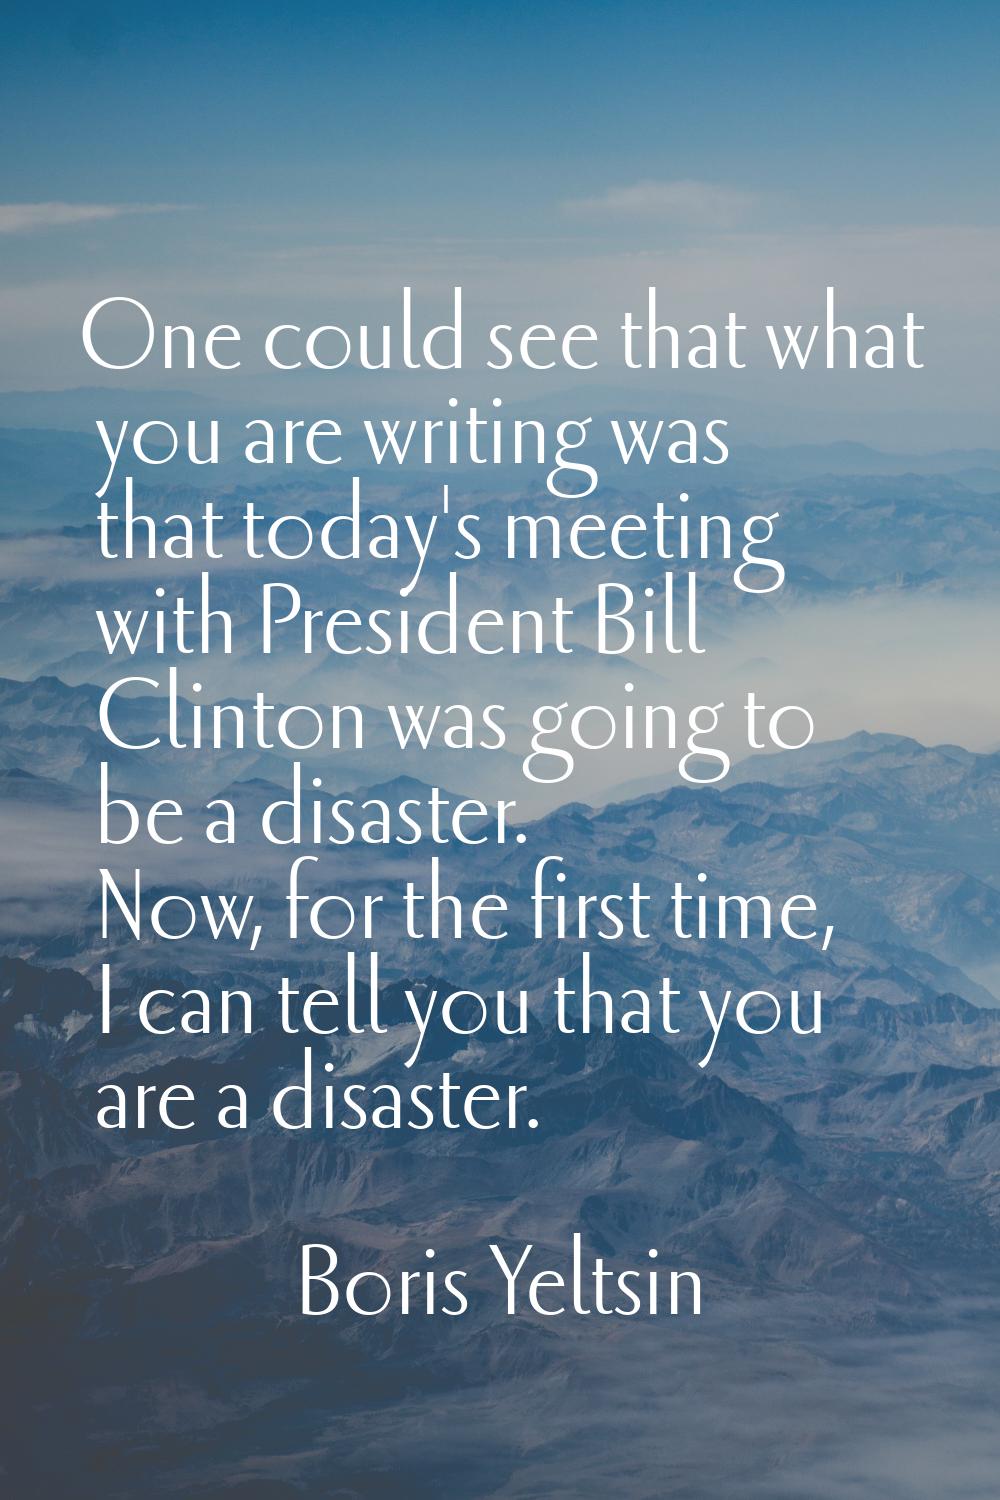 One could see that what you are writing was that today's meeting with President Bill Clinton was go